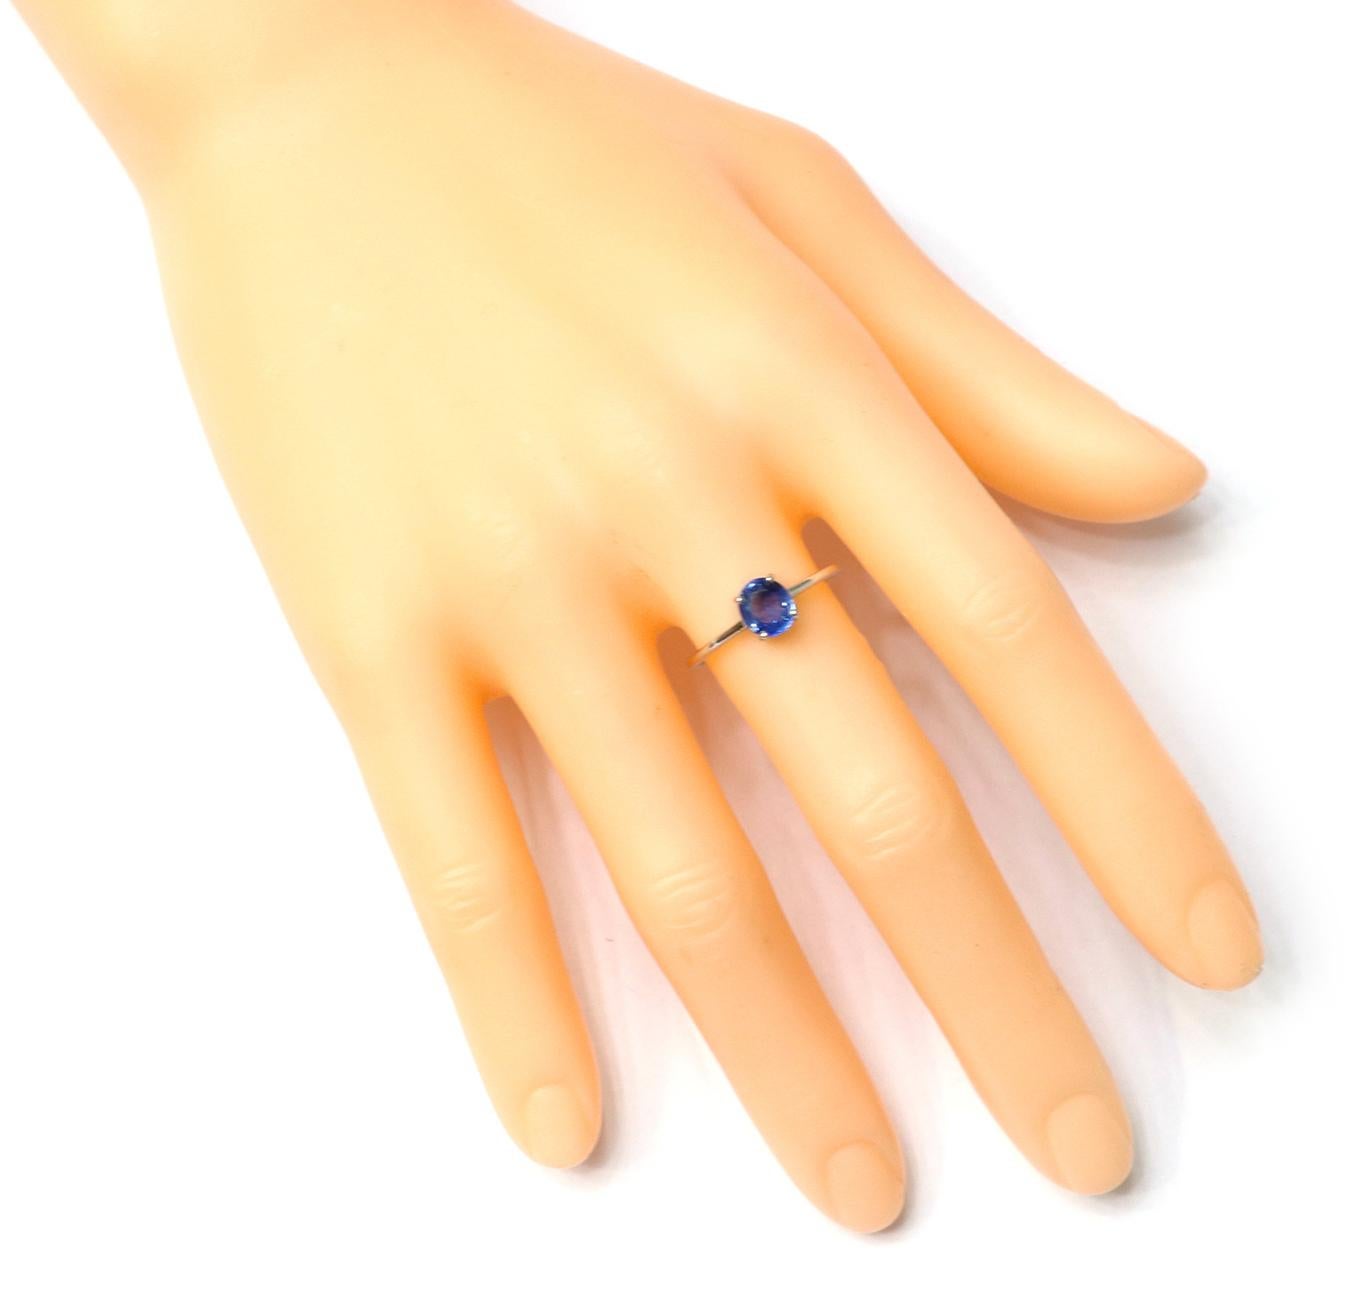 18 Karat White Gold 1.32 Carat Blue Sapphire Ring in Prong Setting

Crafted in a gorgeous design, this classic is set to become your new favorite. Featuring an Oval-Cut Blue-Sapphire it's offset with a vintage white gold band for a flawless finish.